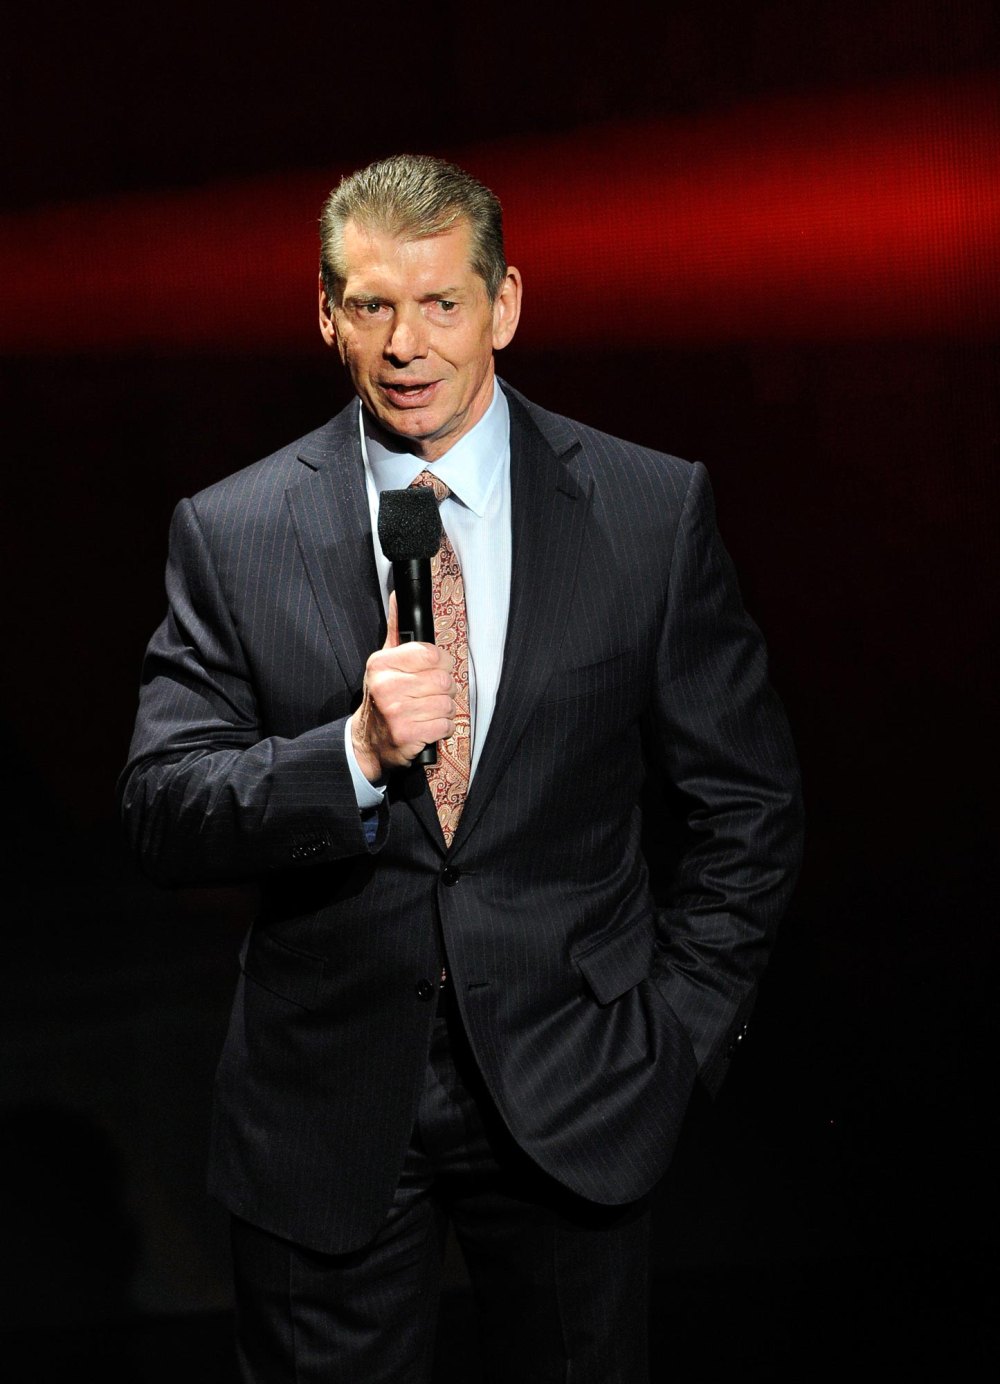 Vince McMahon Claims Sexual Misconduct Accuser Would Willingly Visit His Home During Their Affair 162